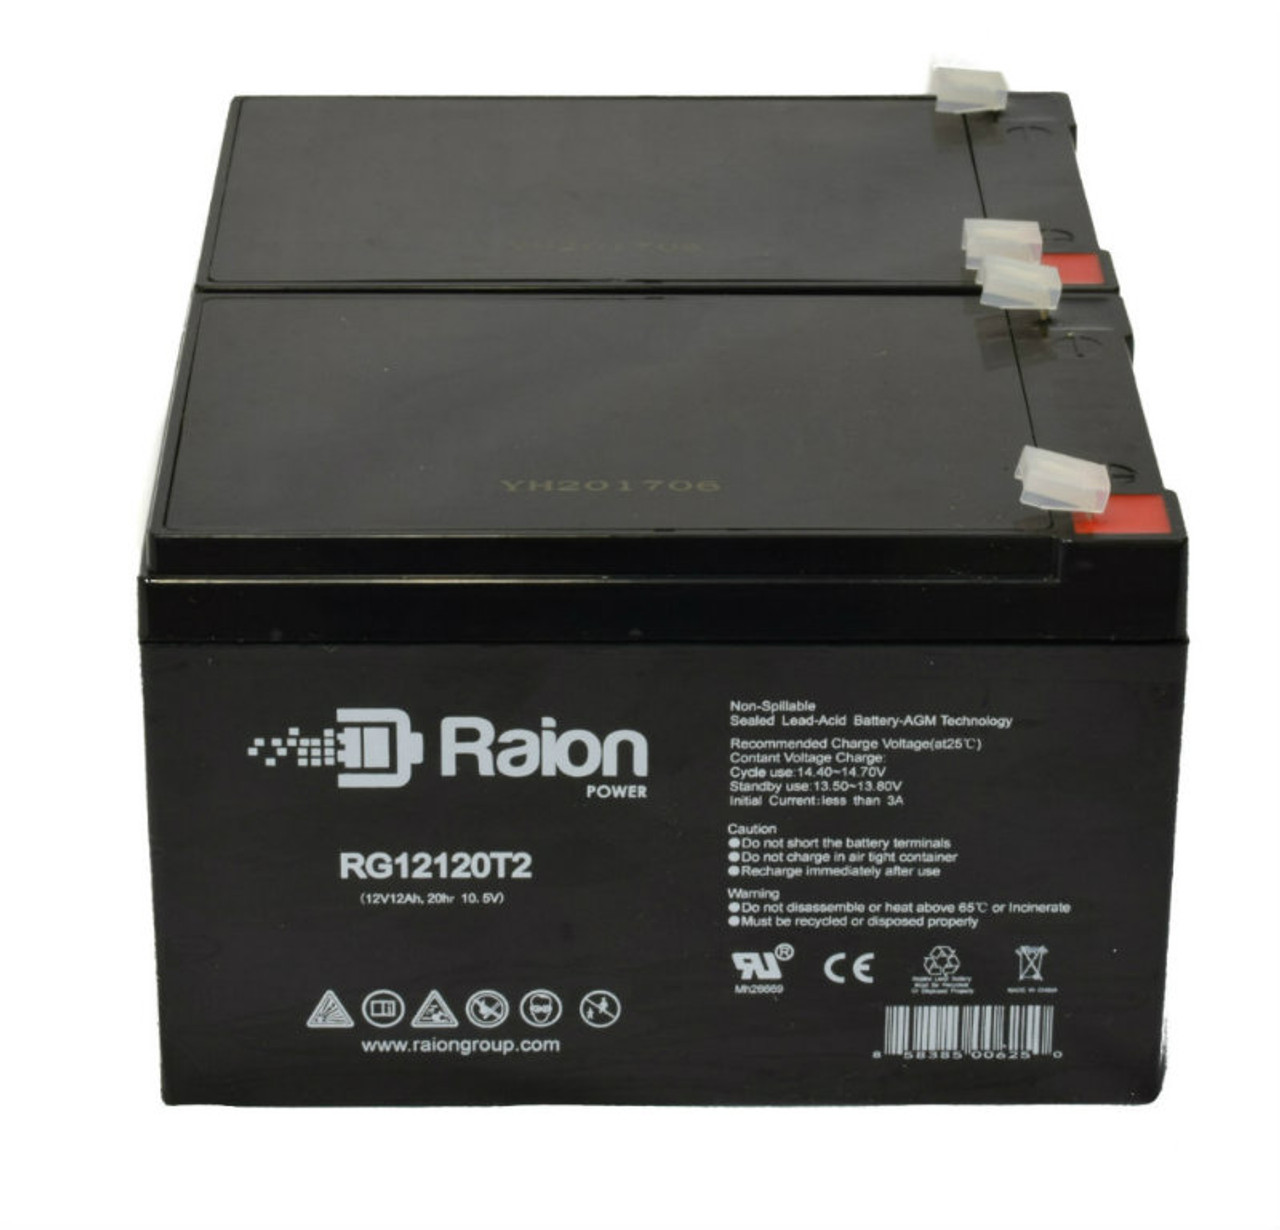 Raion Power 12V 12Ah Non-Spillable Compatible Replacement Battery for Merits Health Mini-Coupe S549 - (2 Pack)